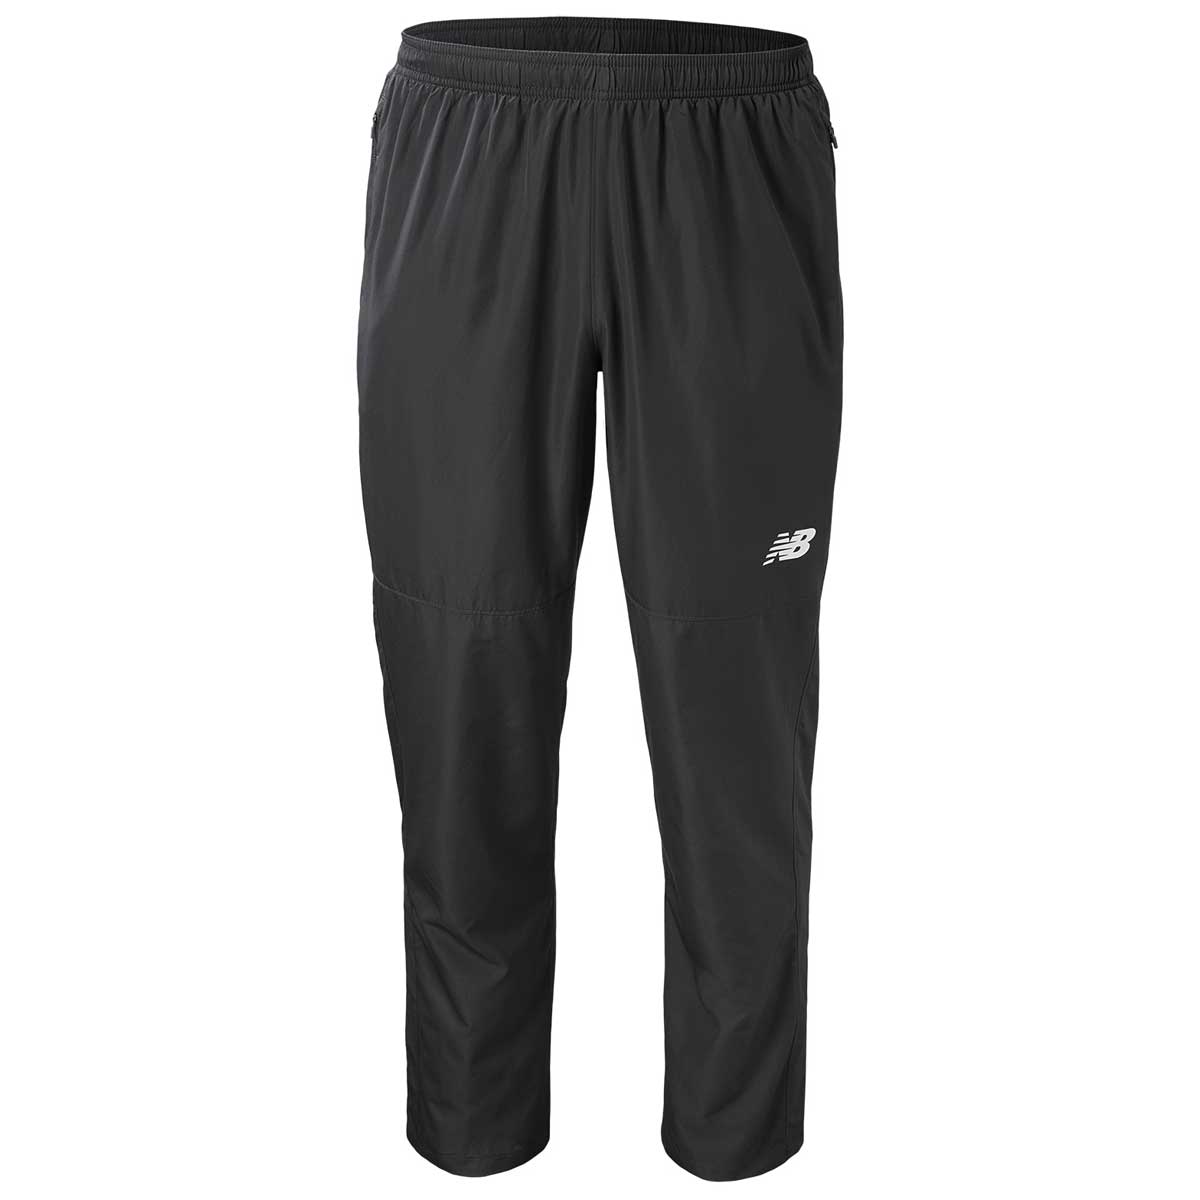  New Balance Men's 2.0 Soft Base Layer Pant with Non